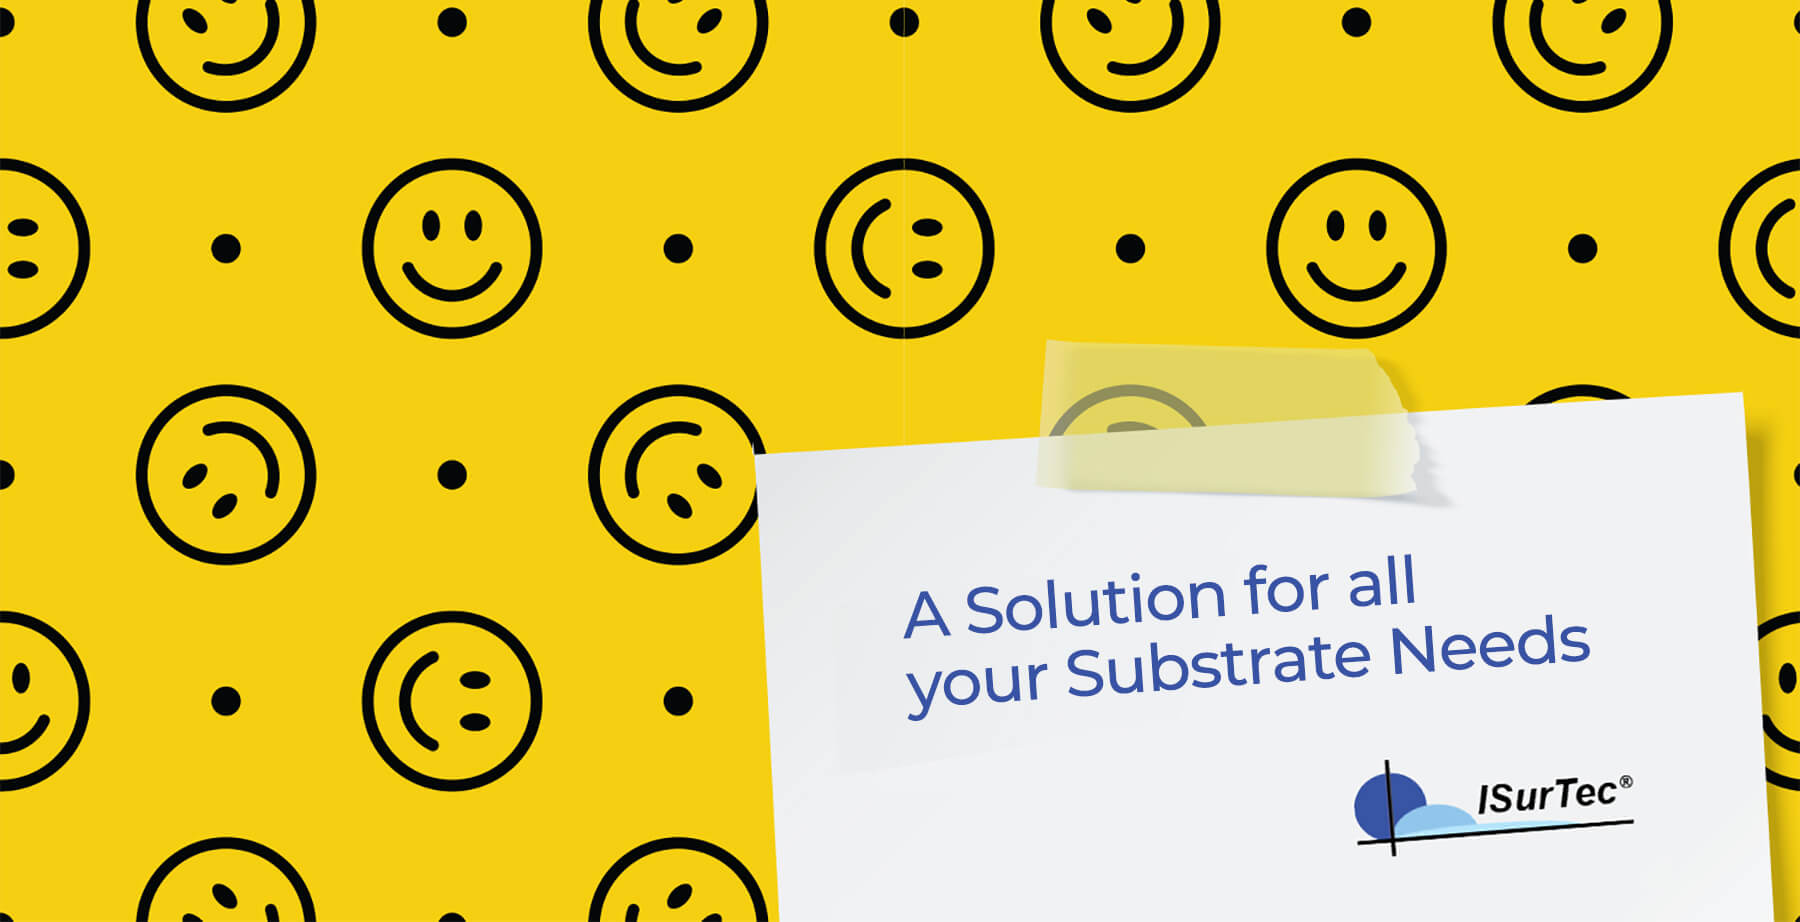 A Solution for all your Substrate Needs. ISurTec. Text is in a graphic which looks like a surface covered in smiley faces, and the text is on a small note taped to the surface.